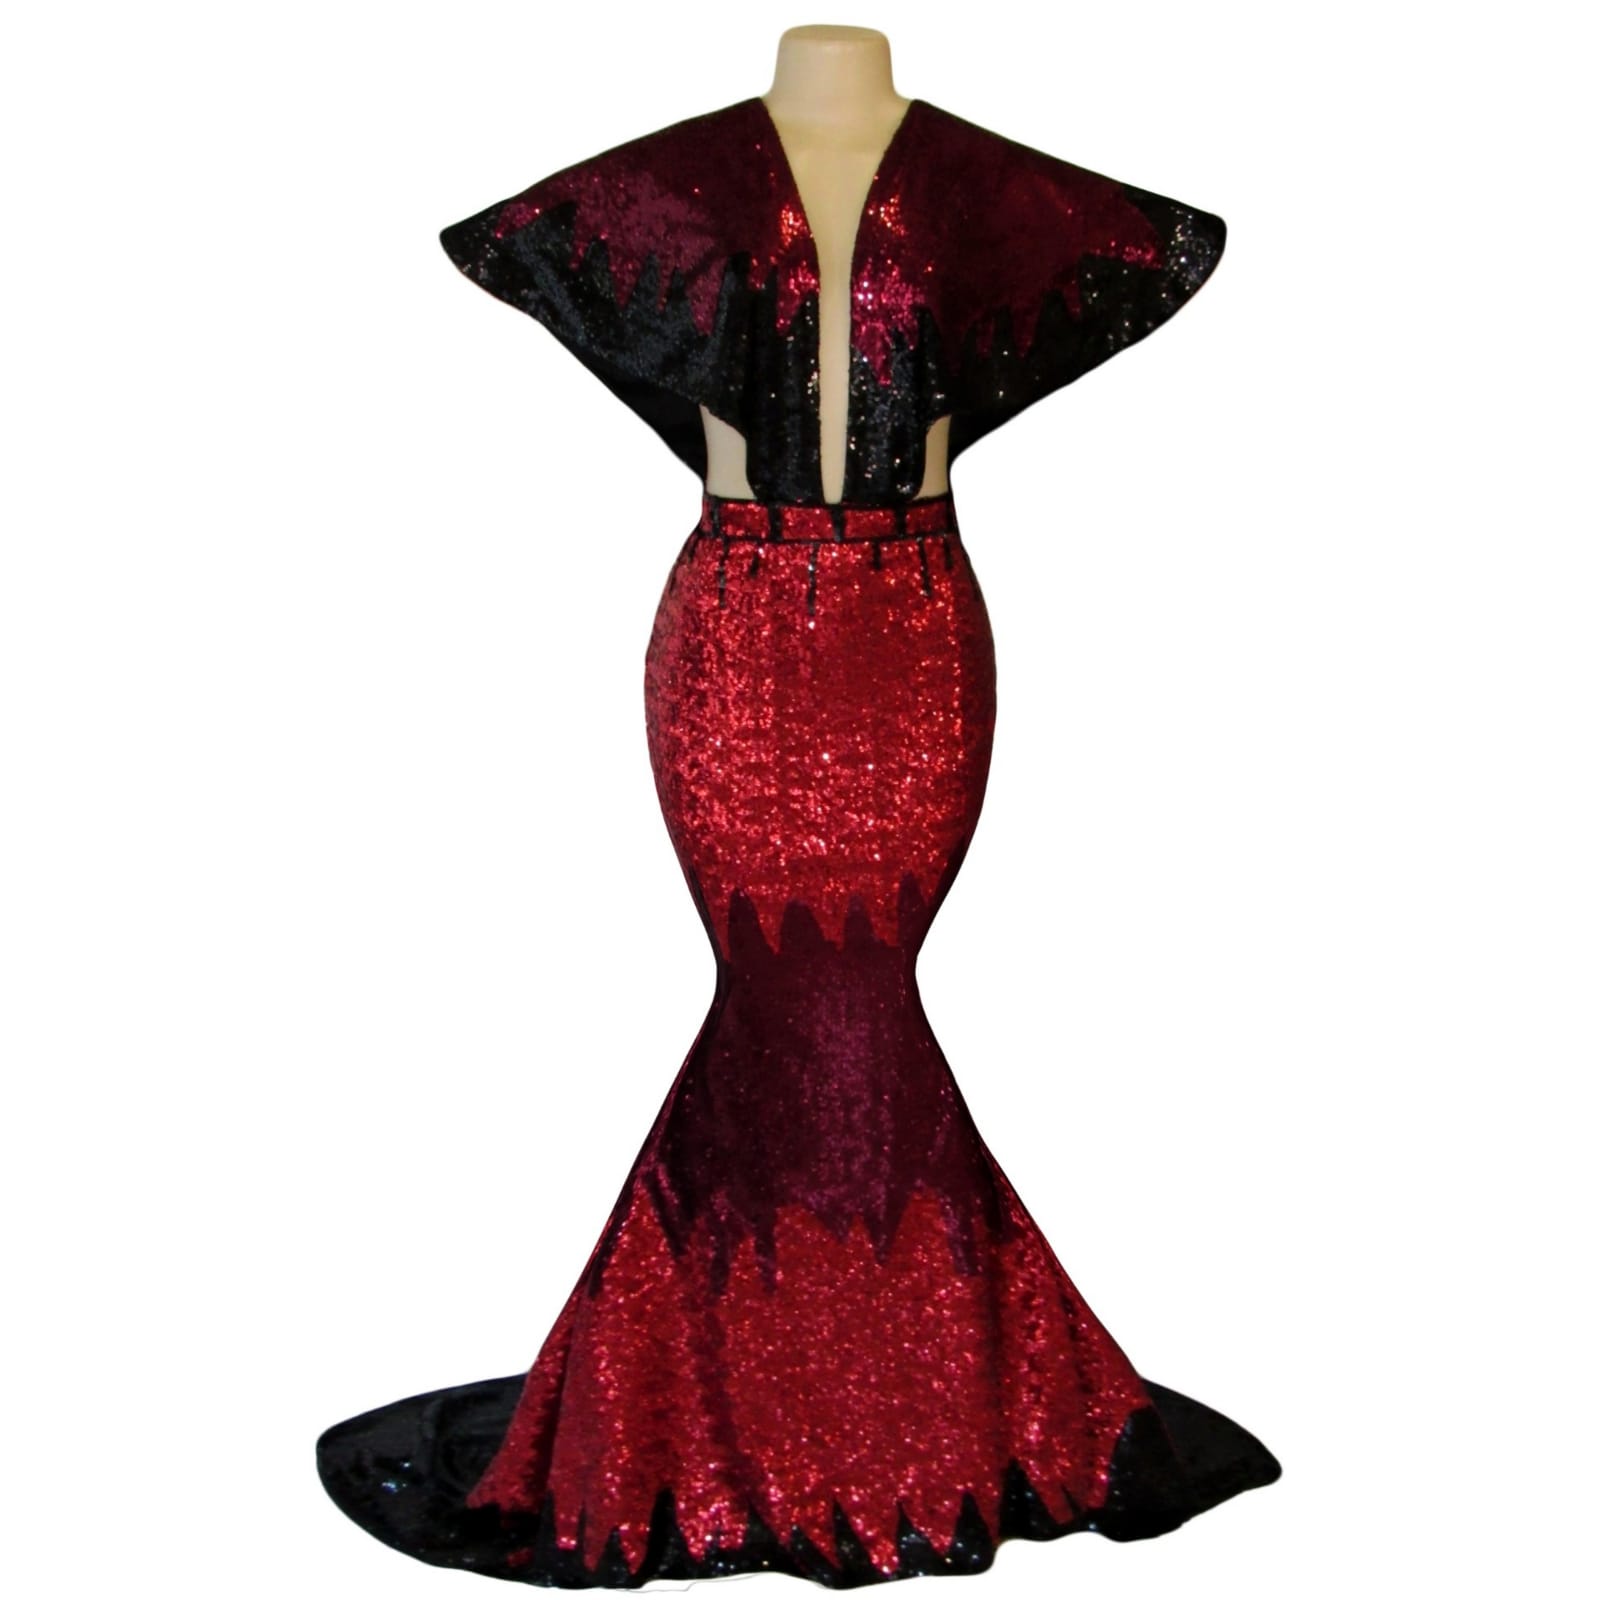 Maroon, burgundy and black sequins prom dress 3 maroon, burgundy and black fully sequined soft mermaid, plunging neckline prom dance dress. With a v open back and wide shoulders creating a short sleeve.